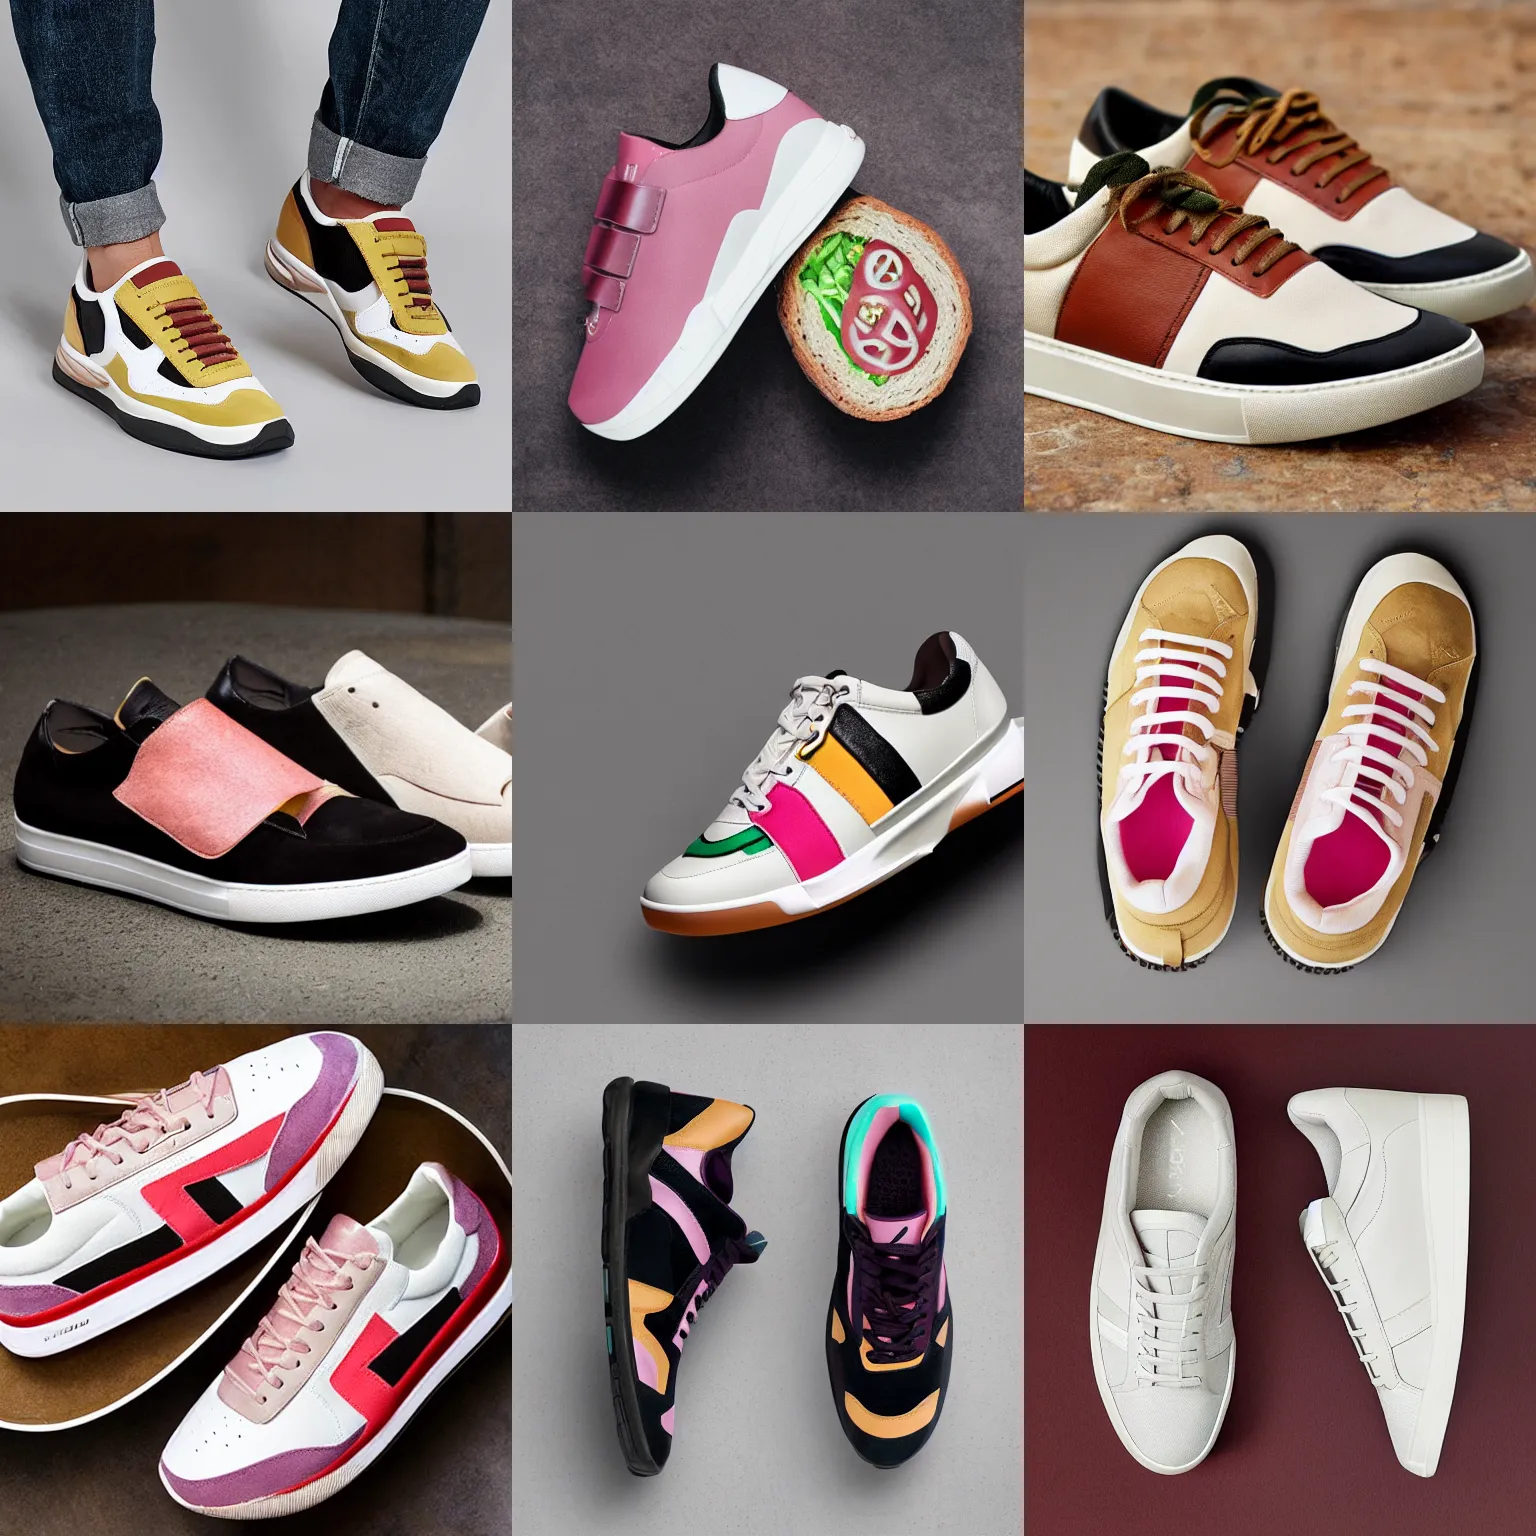 sneaker inspired by a ham sandwich | Stable Diffusion | OpenArt